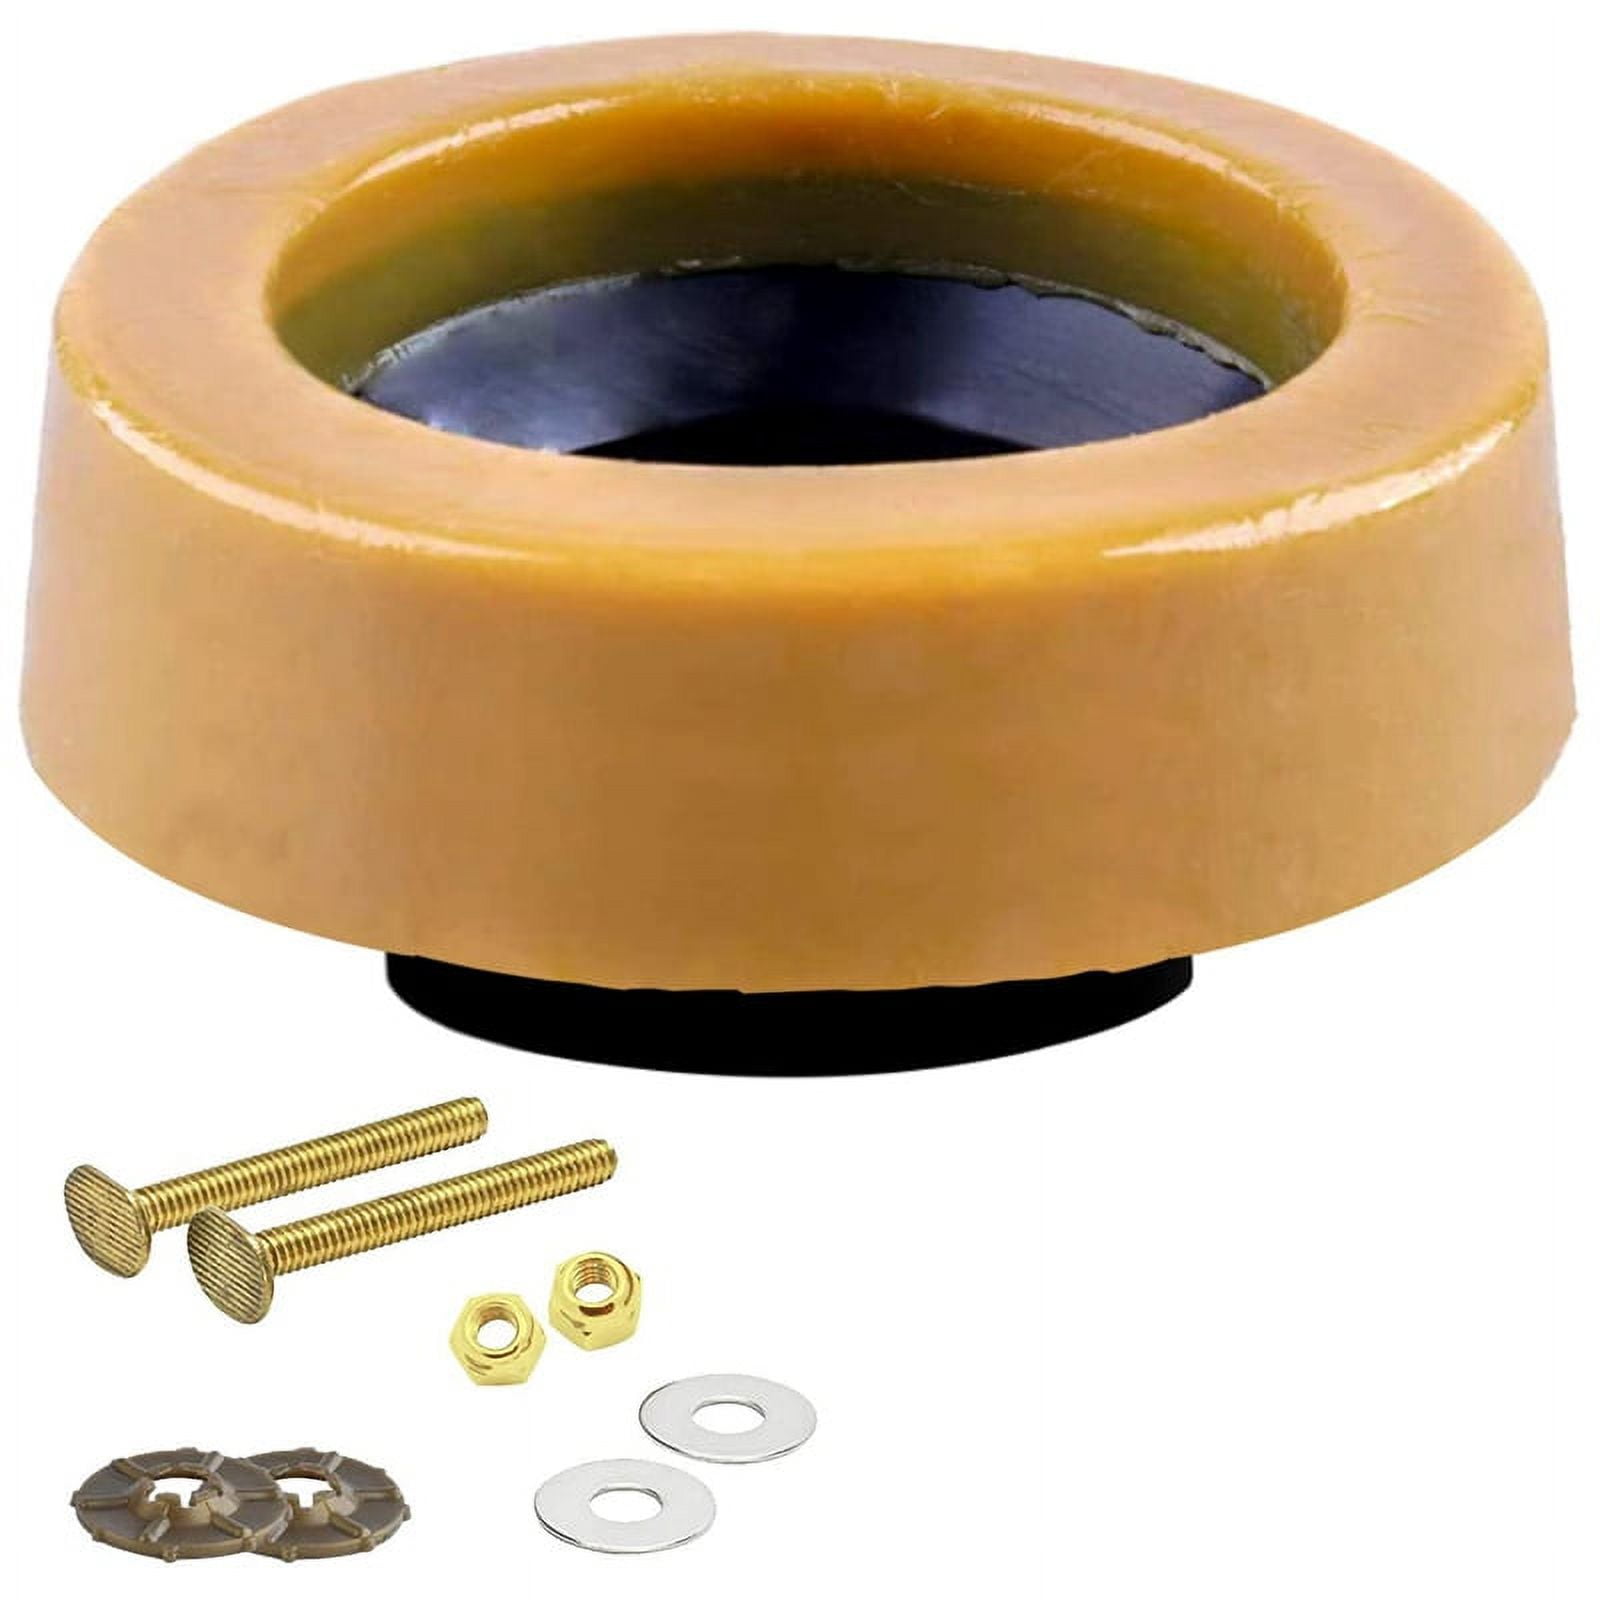 Toilet Wax Ring Kit for Floor Outlet Toilets New Install or Re-seat with  Flange and Bolts 